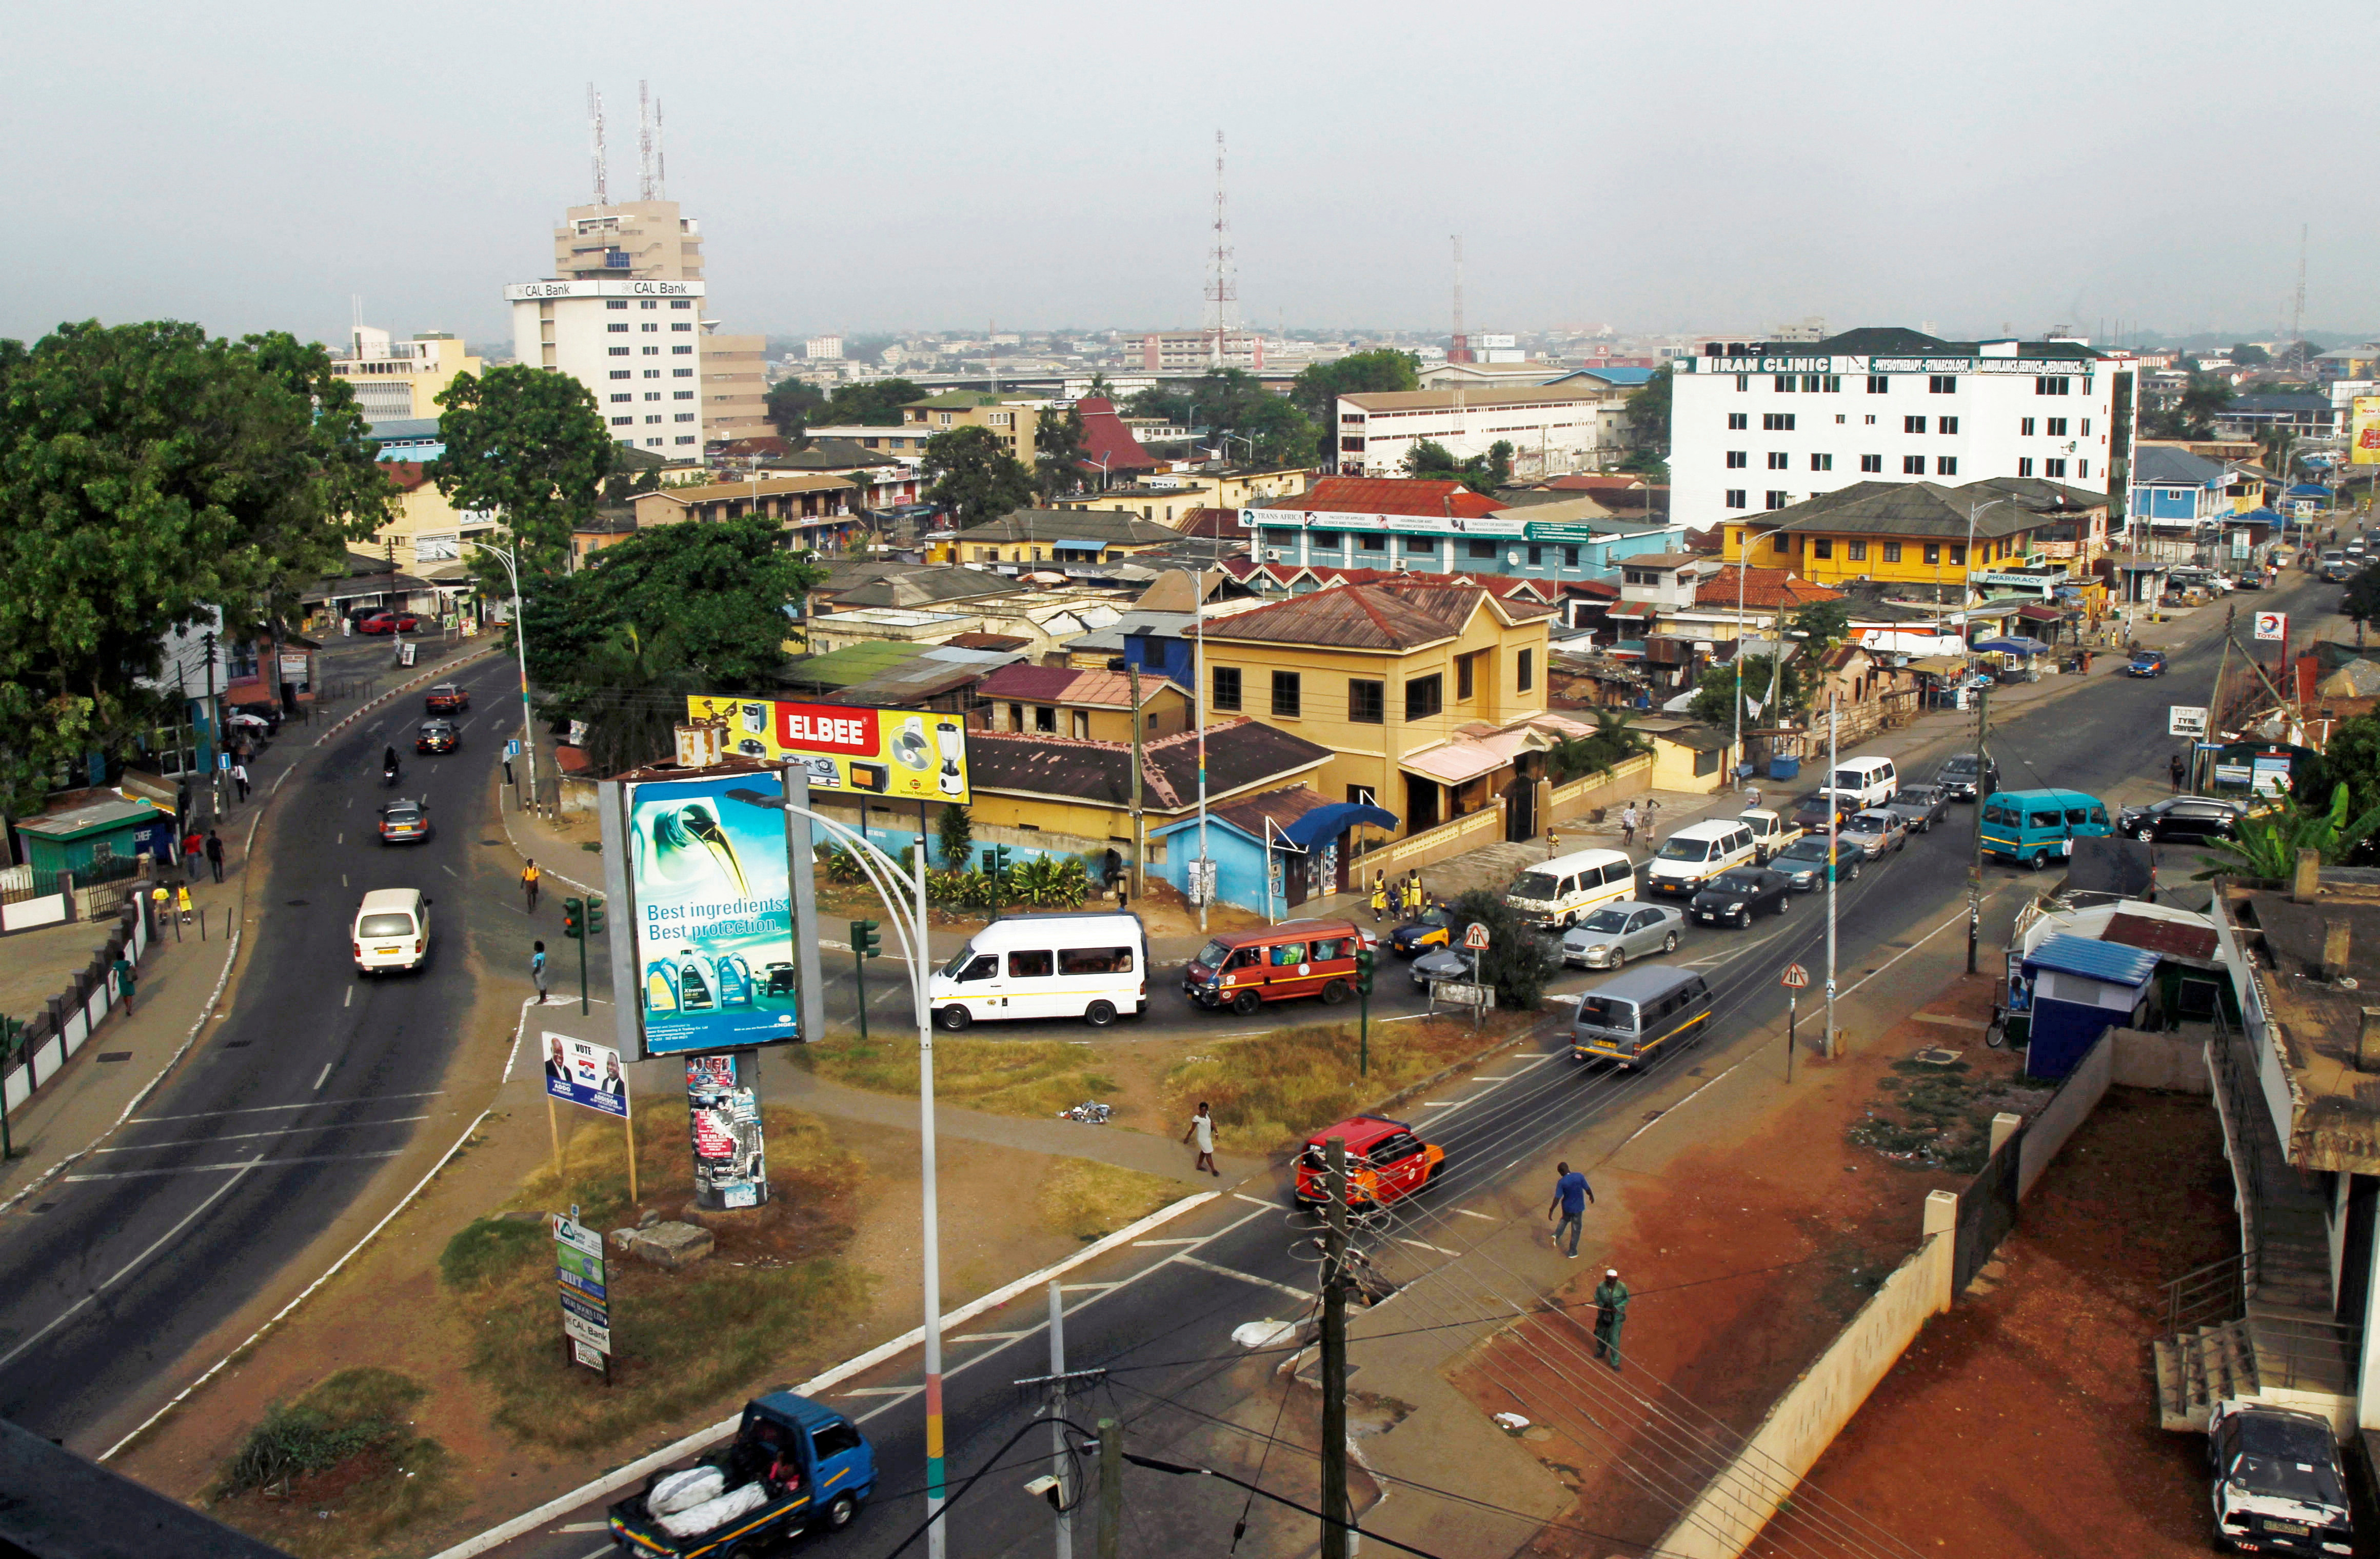 A general view of Adabraka in Accra